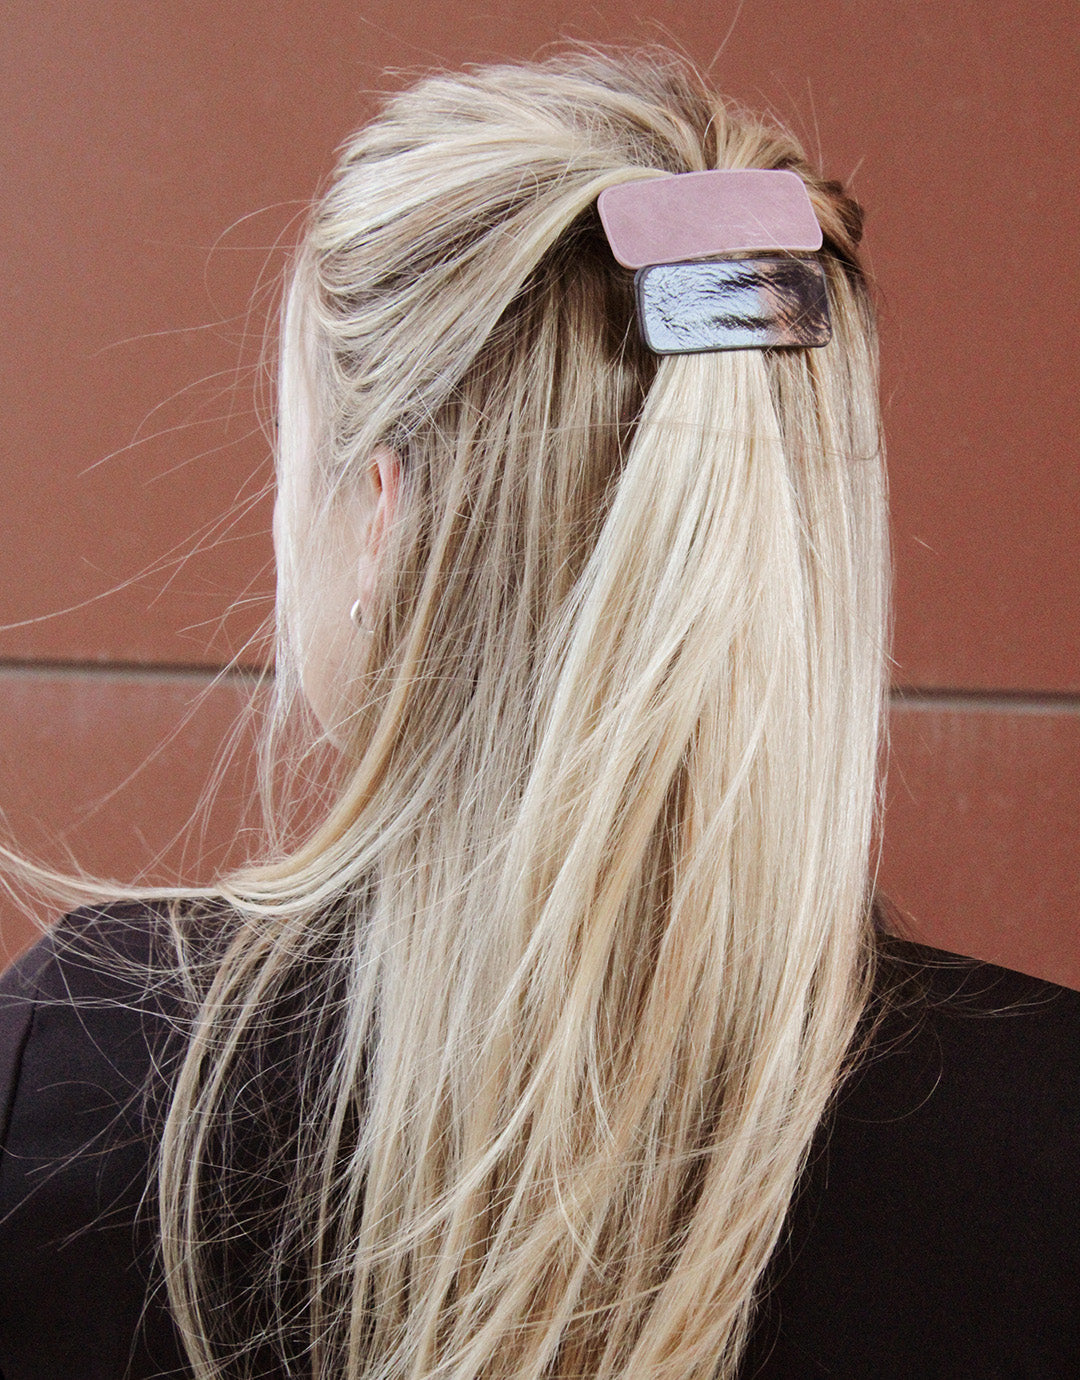 person with long blond hair clipped with 2 barrettes.